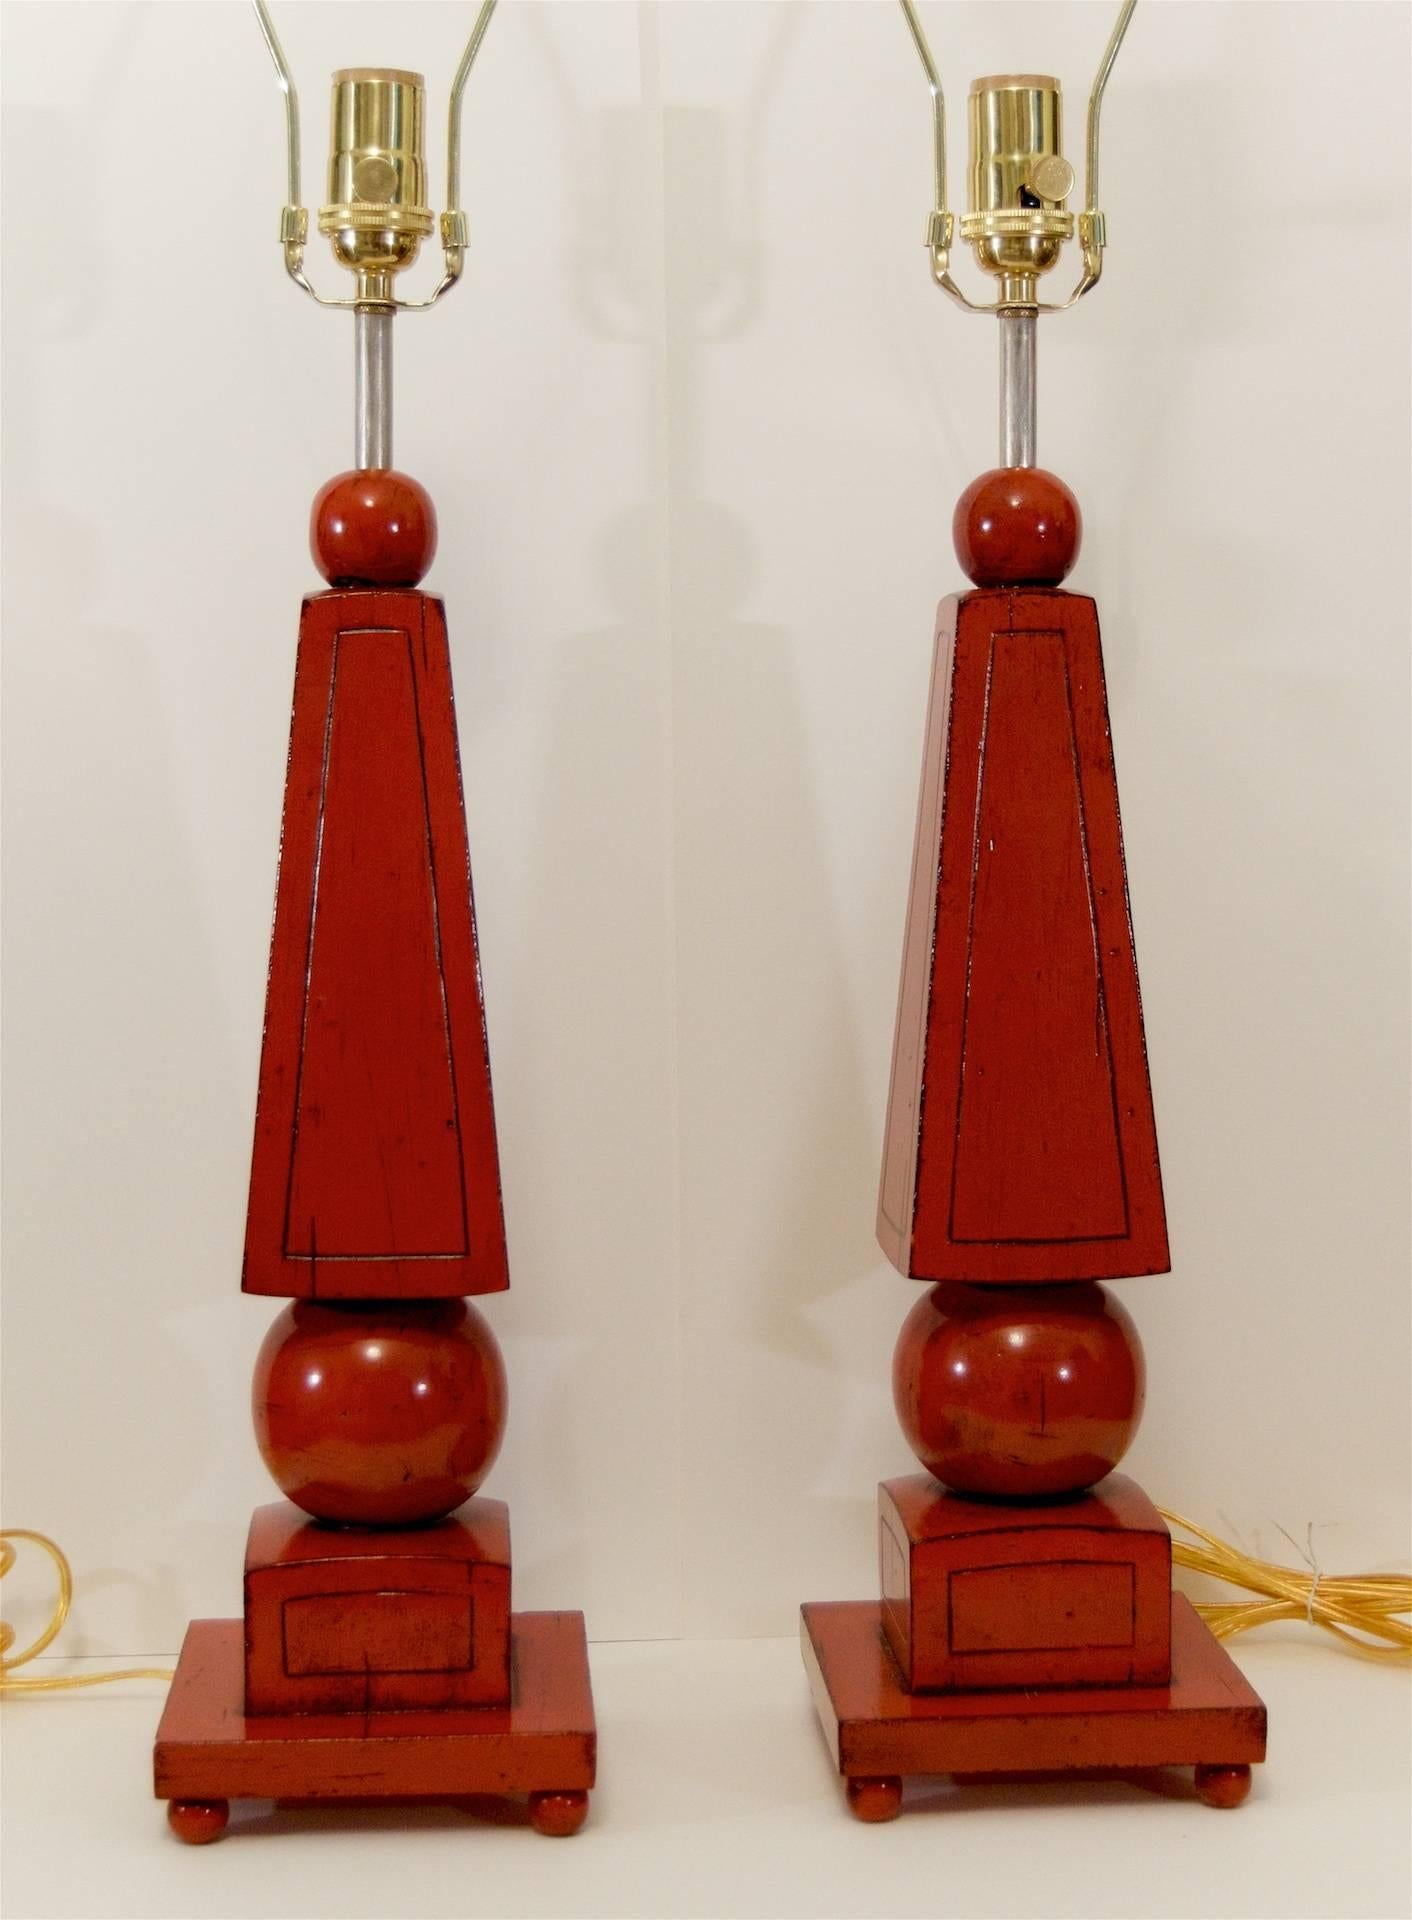 Excellent pair of wood obelisk form table lamps, lacquered in oxblood red with antiquing.

New wiring and three-way medium base switches up to 150 watts.

Height listed is with 10